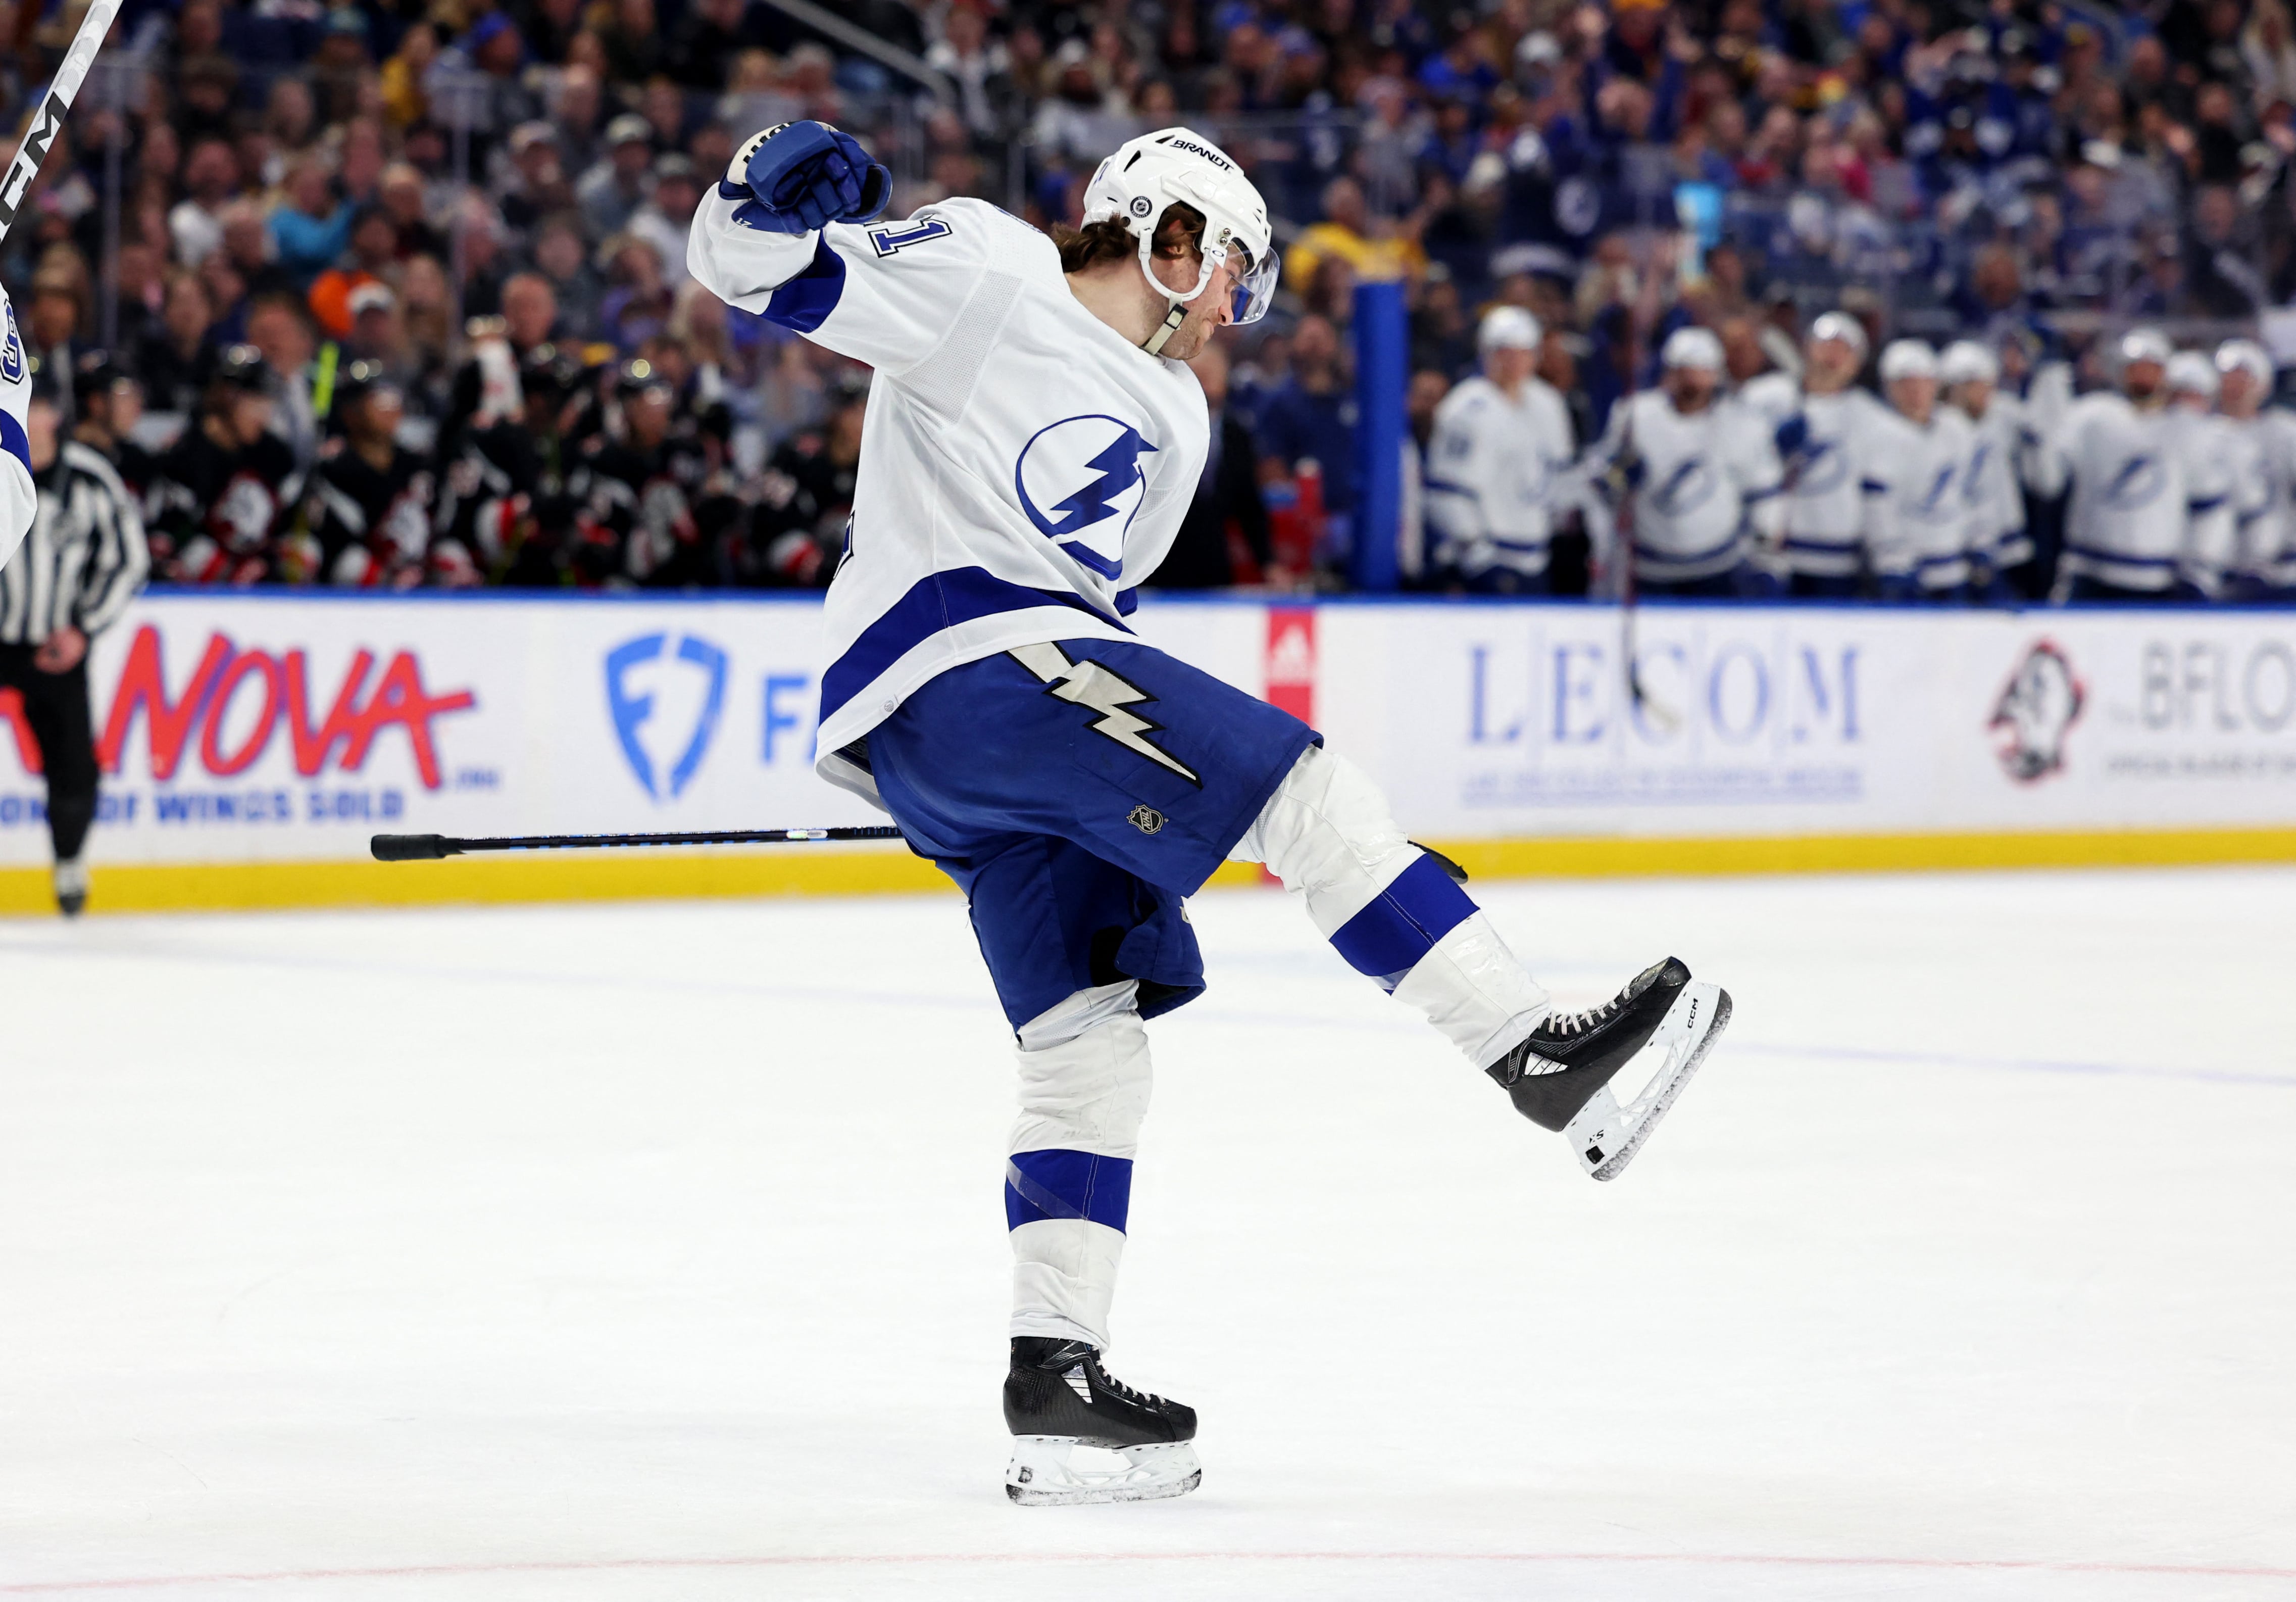 BRAYDEN POINT. Ranking career in NHL EA SPORTS. Tampa Bay